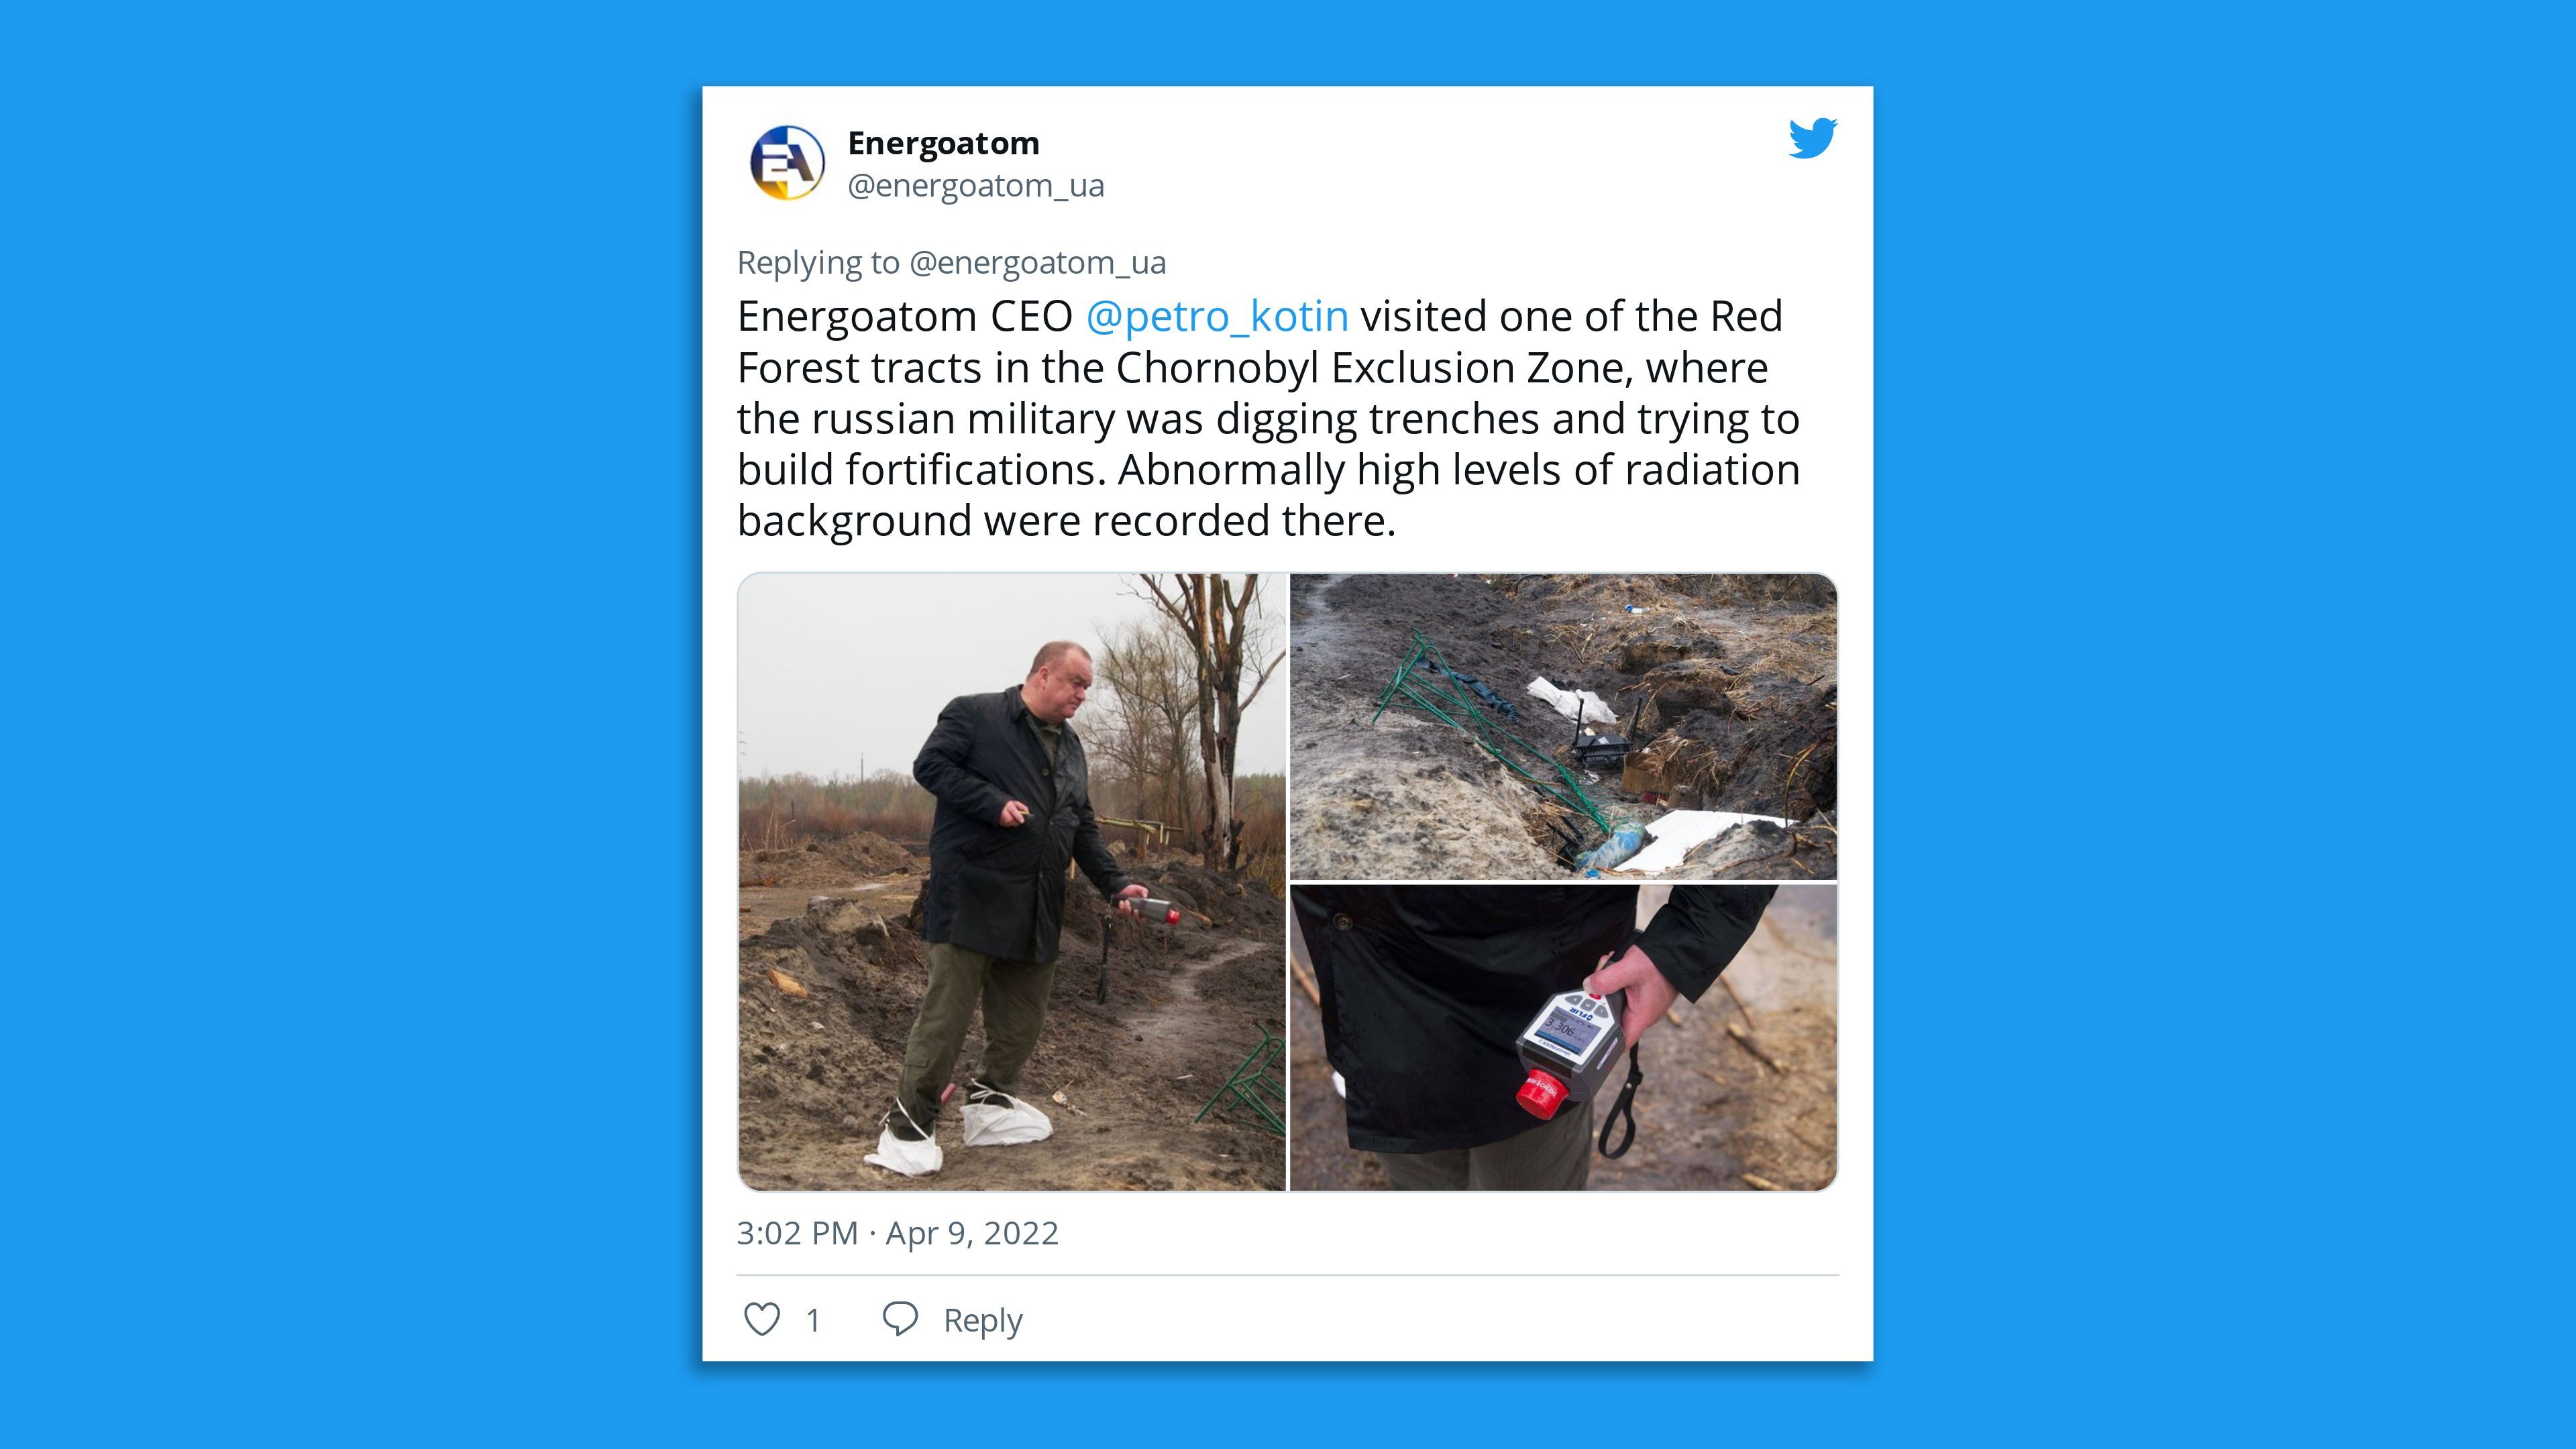 Petro Kotin, CEO of Ukraine energy agency Energoatom, visiting one of the Red Forest tracts in the Chernobyl Exclusion Zone.